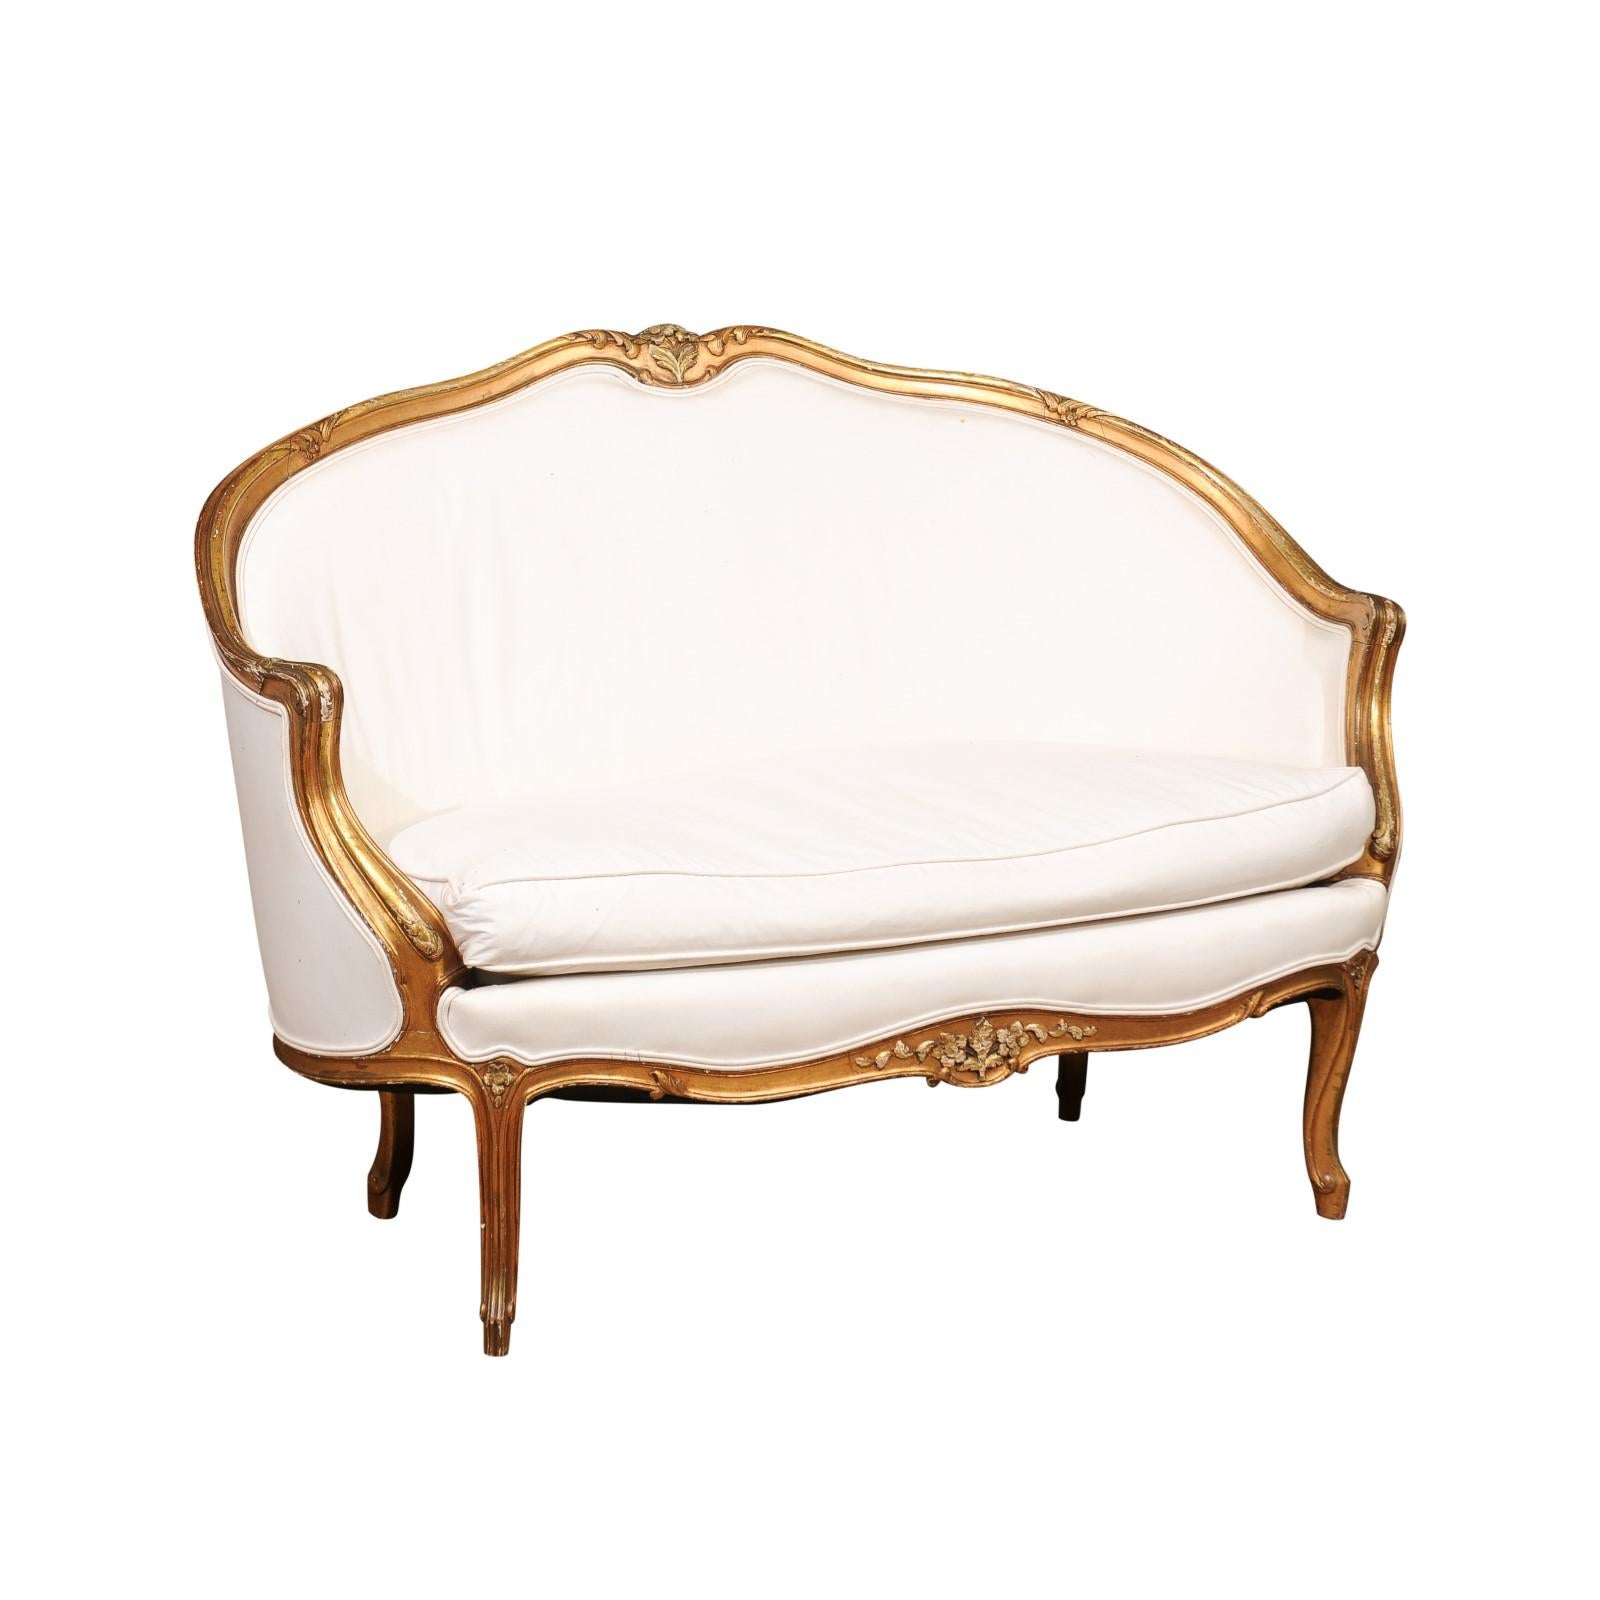 A French Louis XV style giltwood petite upholstered sofa from the mid-19th century. This small size French canapé features a giltwood frame showing the typical curvy lines of the Louis XV era. The crest is carved with a delicate floral motif